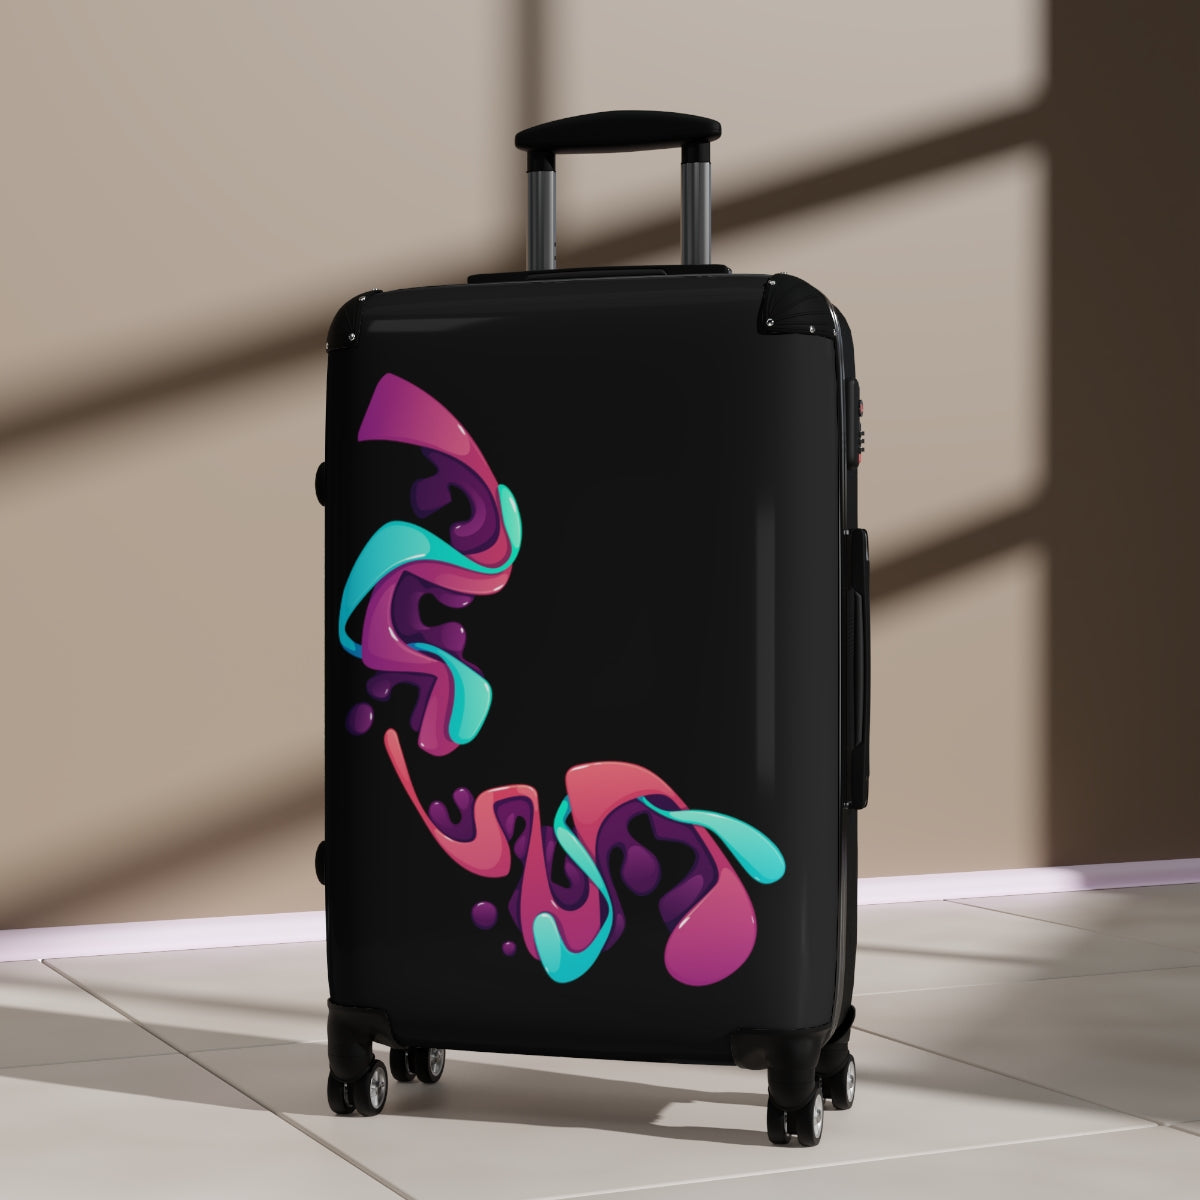  CARRY-ON LUGGAGE, ARTISTIC DESIGN, CABIN SUITCASE AND CHECK IN LUGGAGE, LUGGAGE FOR WOMEN, MEN